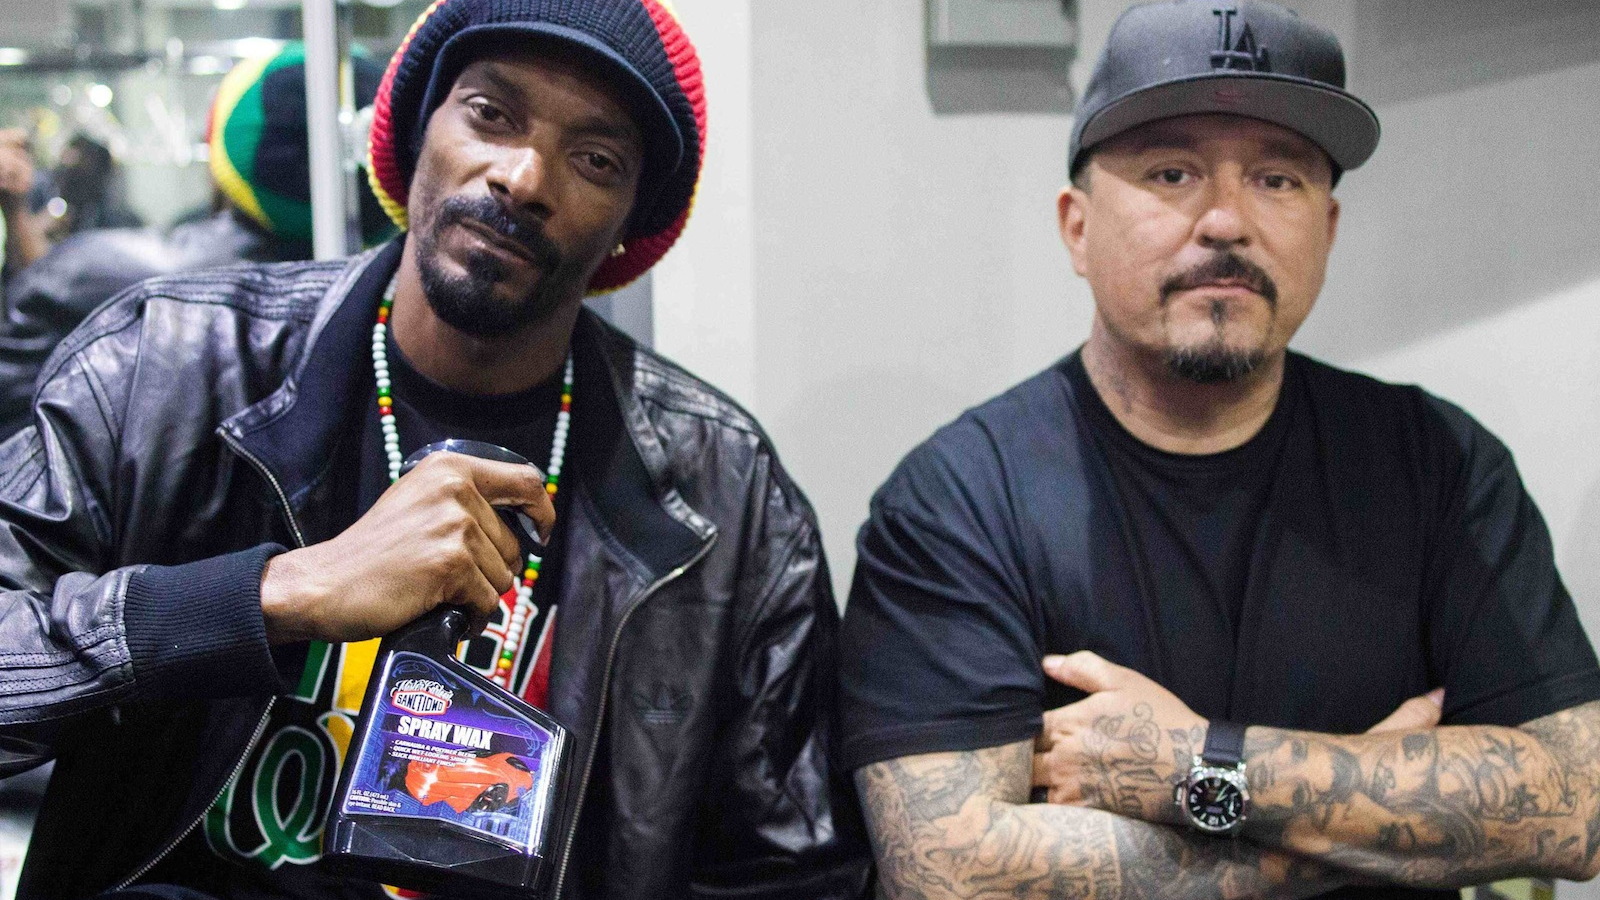 Snoop Dogg and Mister Cartoon, teamed up to promote Sanctiond car care products